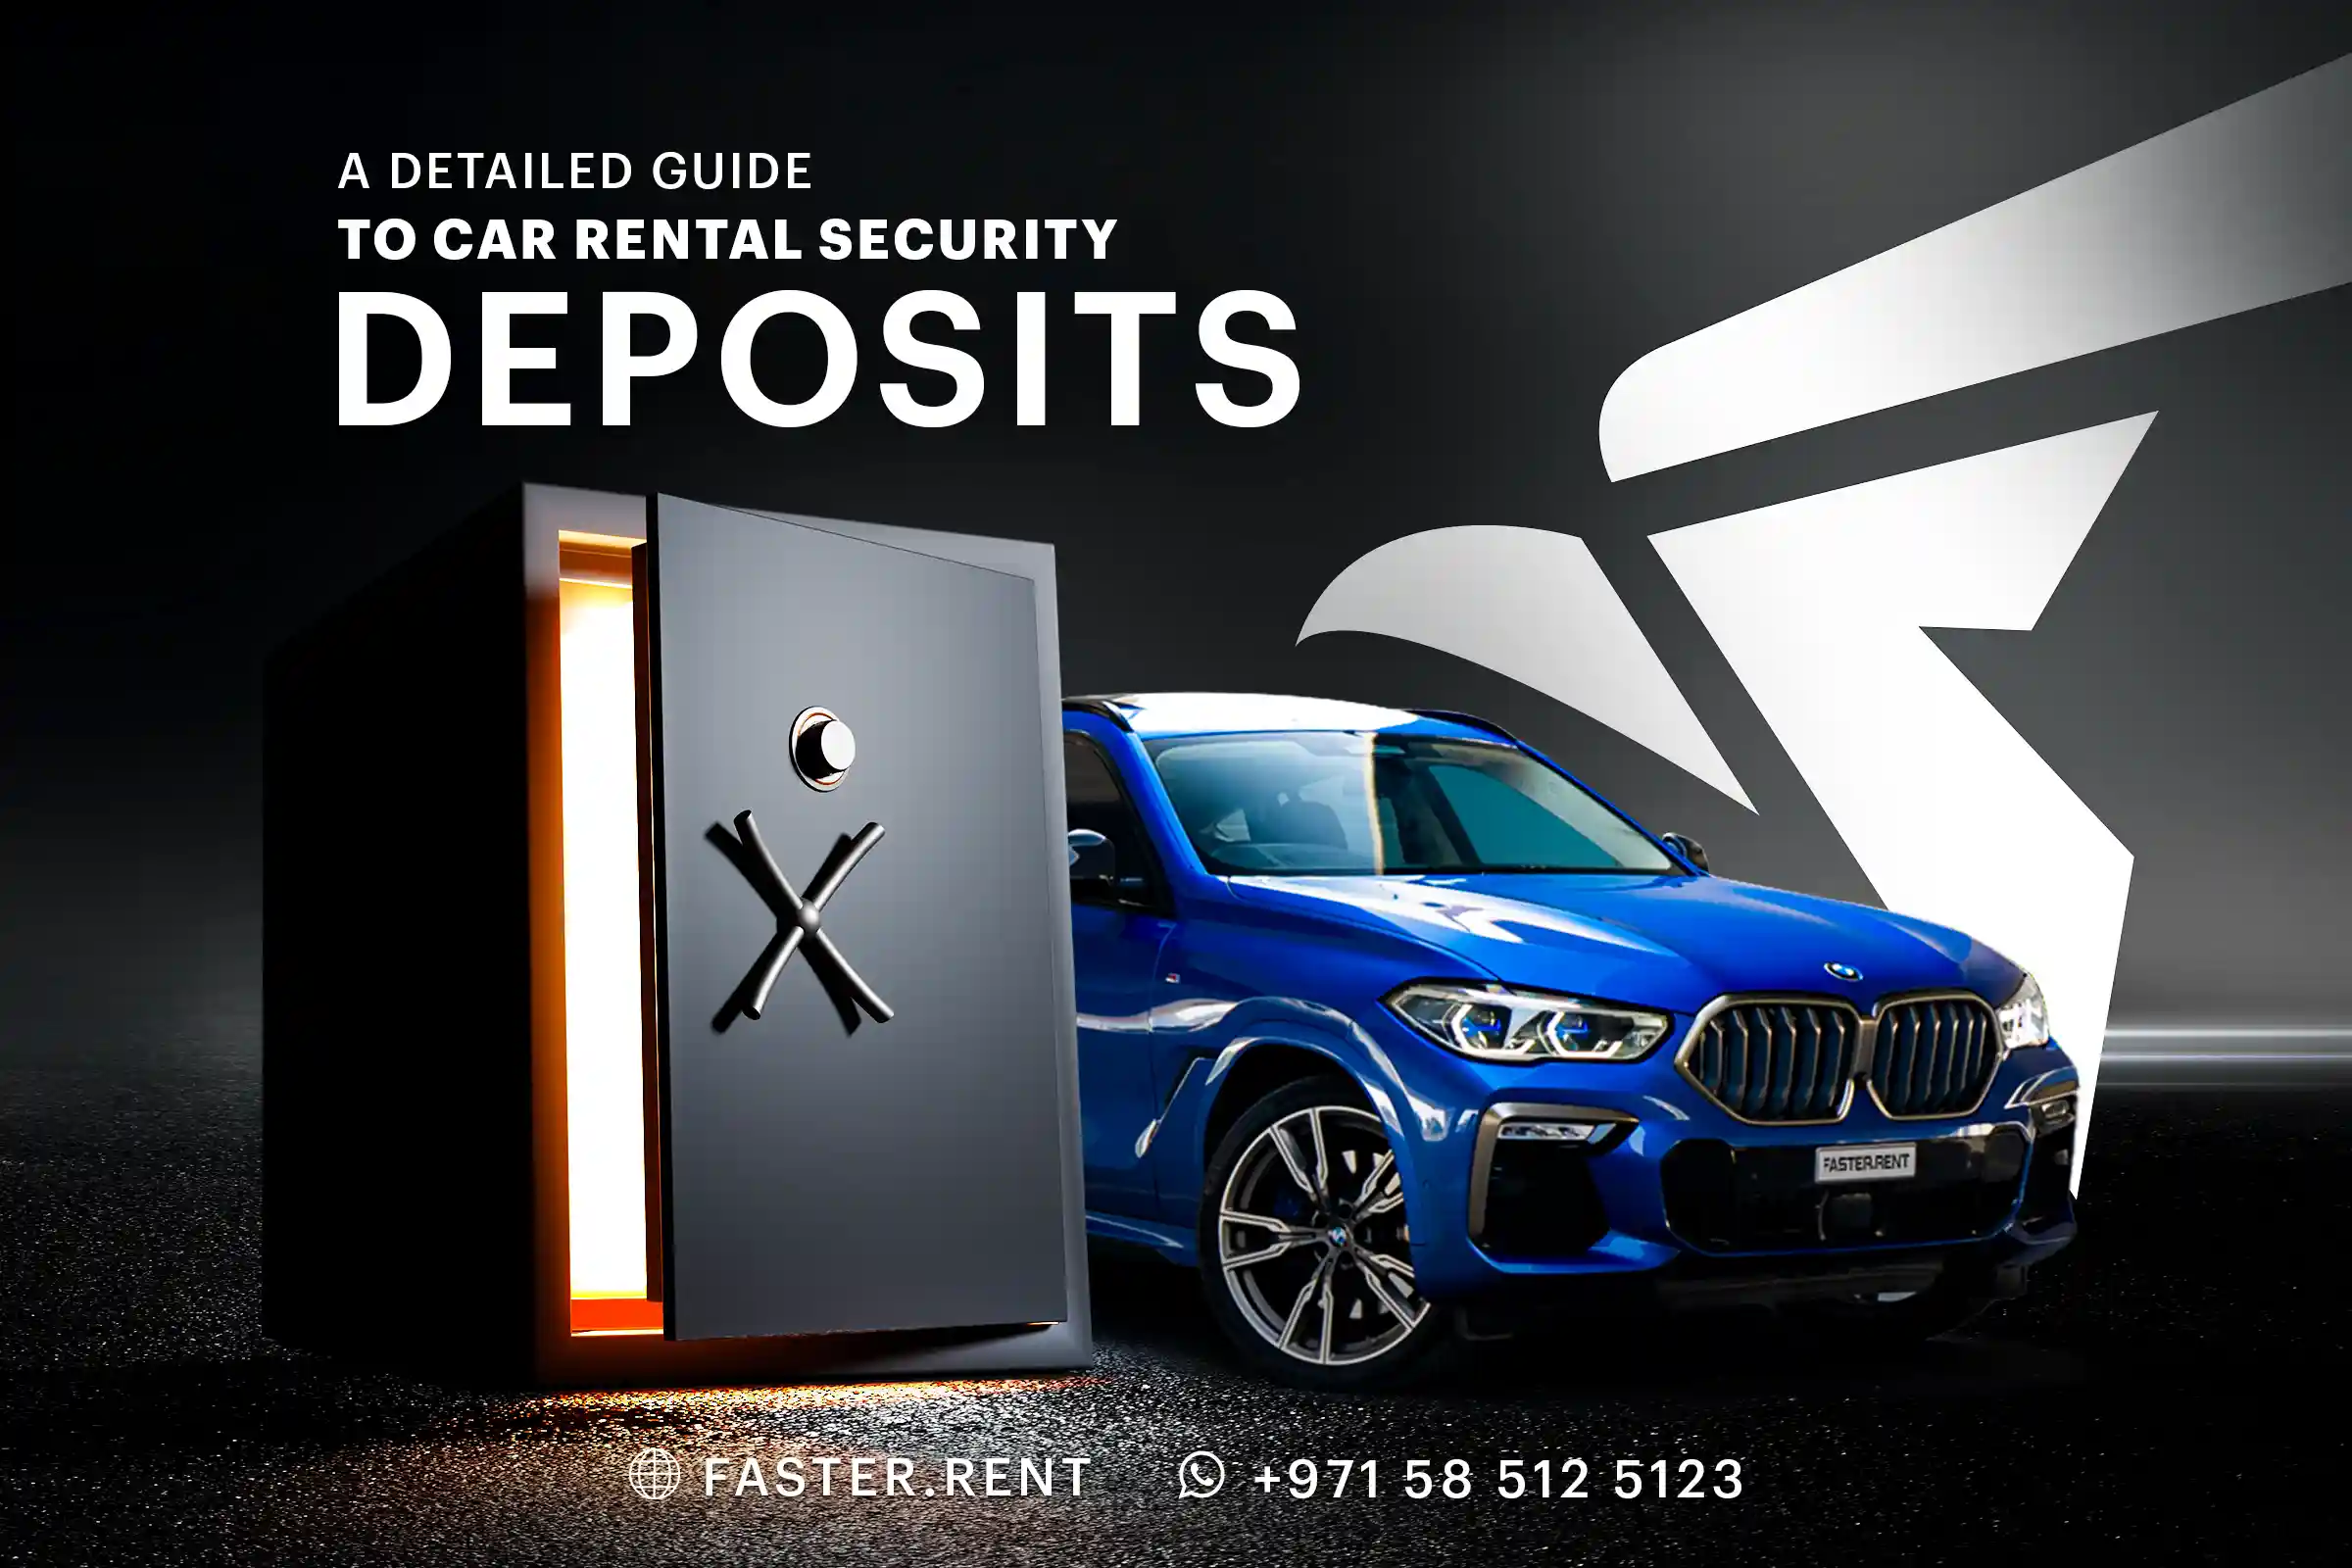 A Detailed Guide to Car Rental Security Deposits in UAE